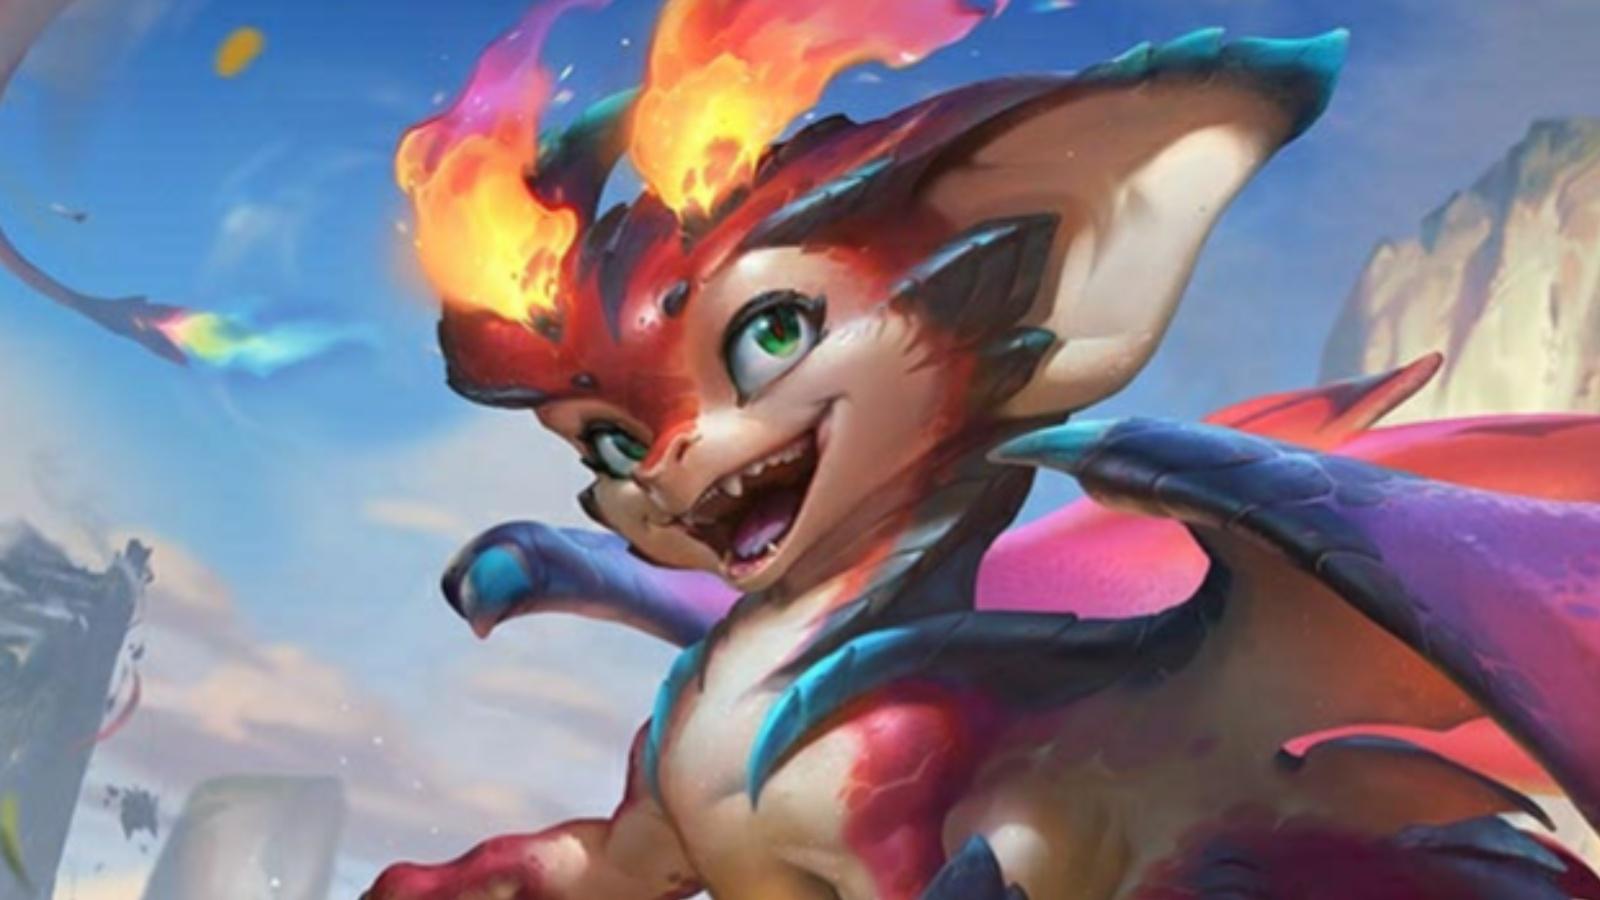 Cover art featuring Smolder in League of Legends.